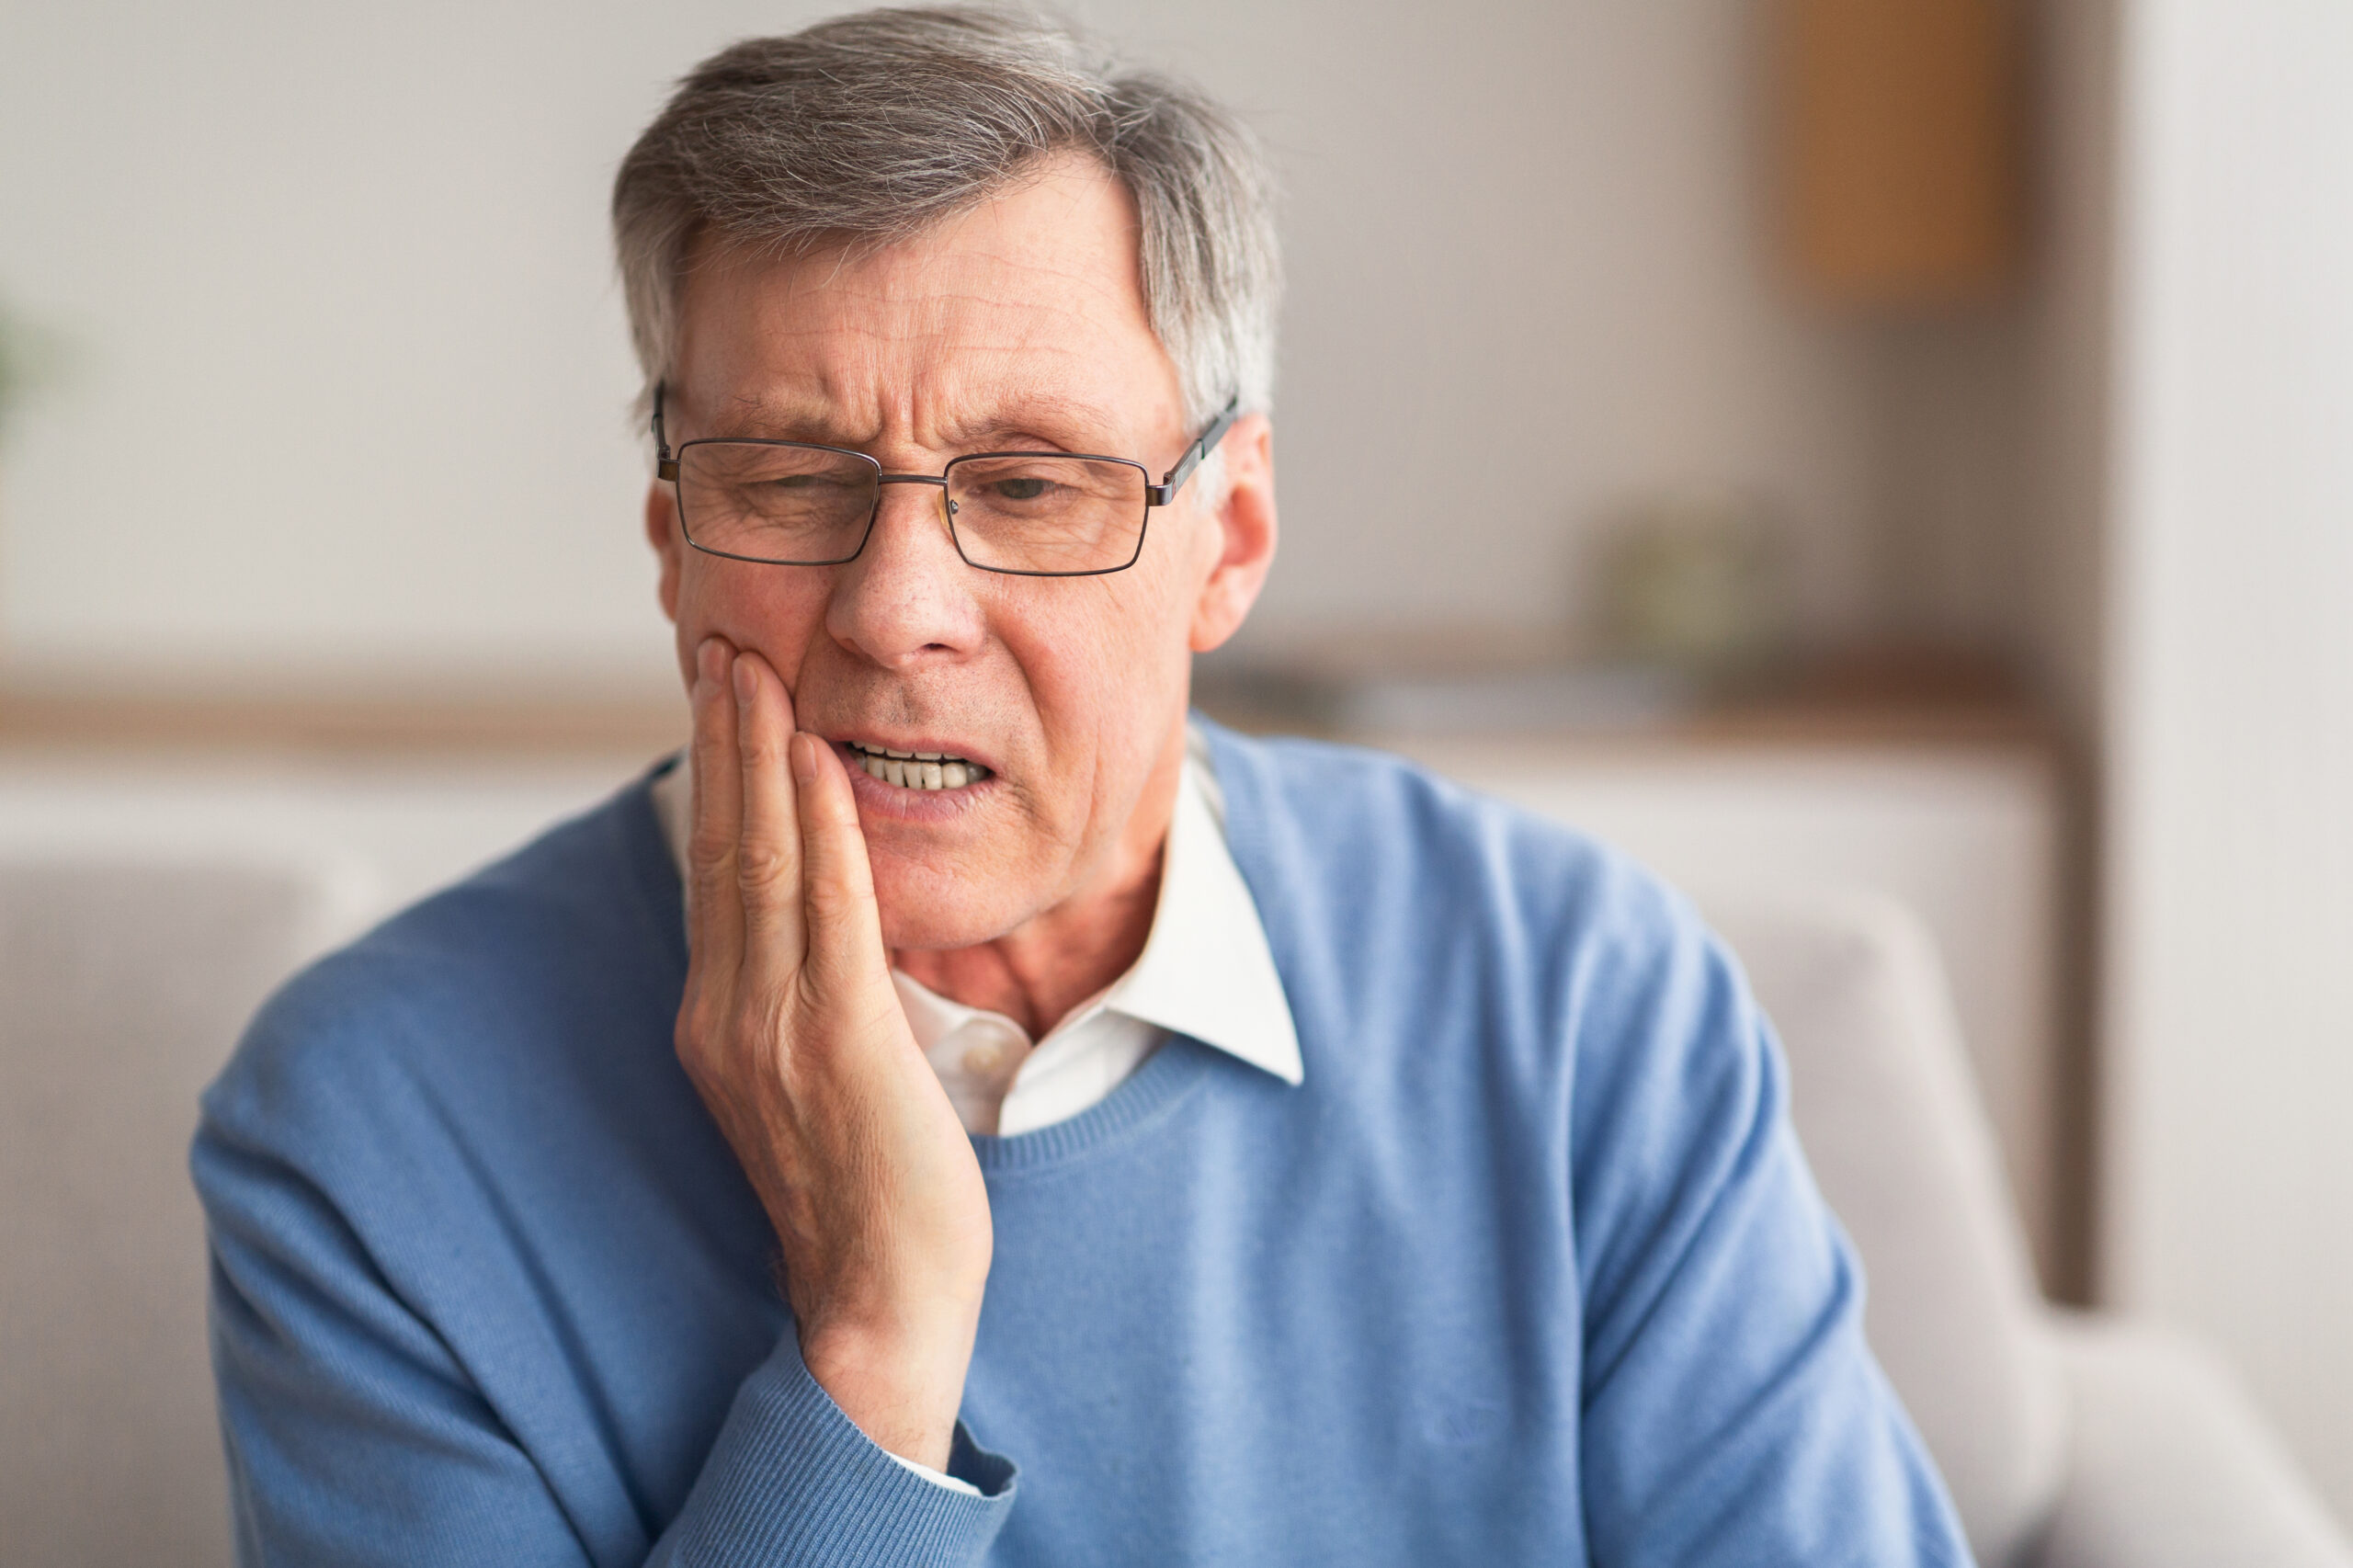 Tooth sensitivity is a common dental complaint that involves pain or discomfort in teeth when exposed to certain temperatures or substances.
Elderly Man Having Toothache Touching Cheek Suffering From Pain Sitting On Sofa At Home. Selective Focus